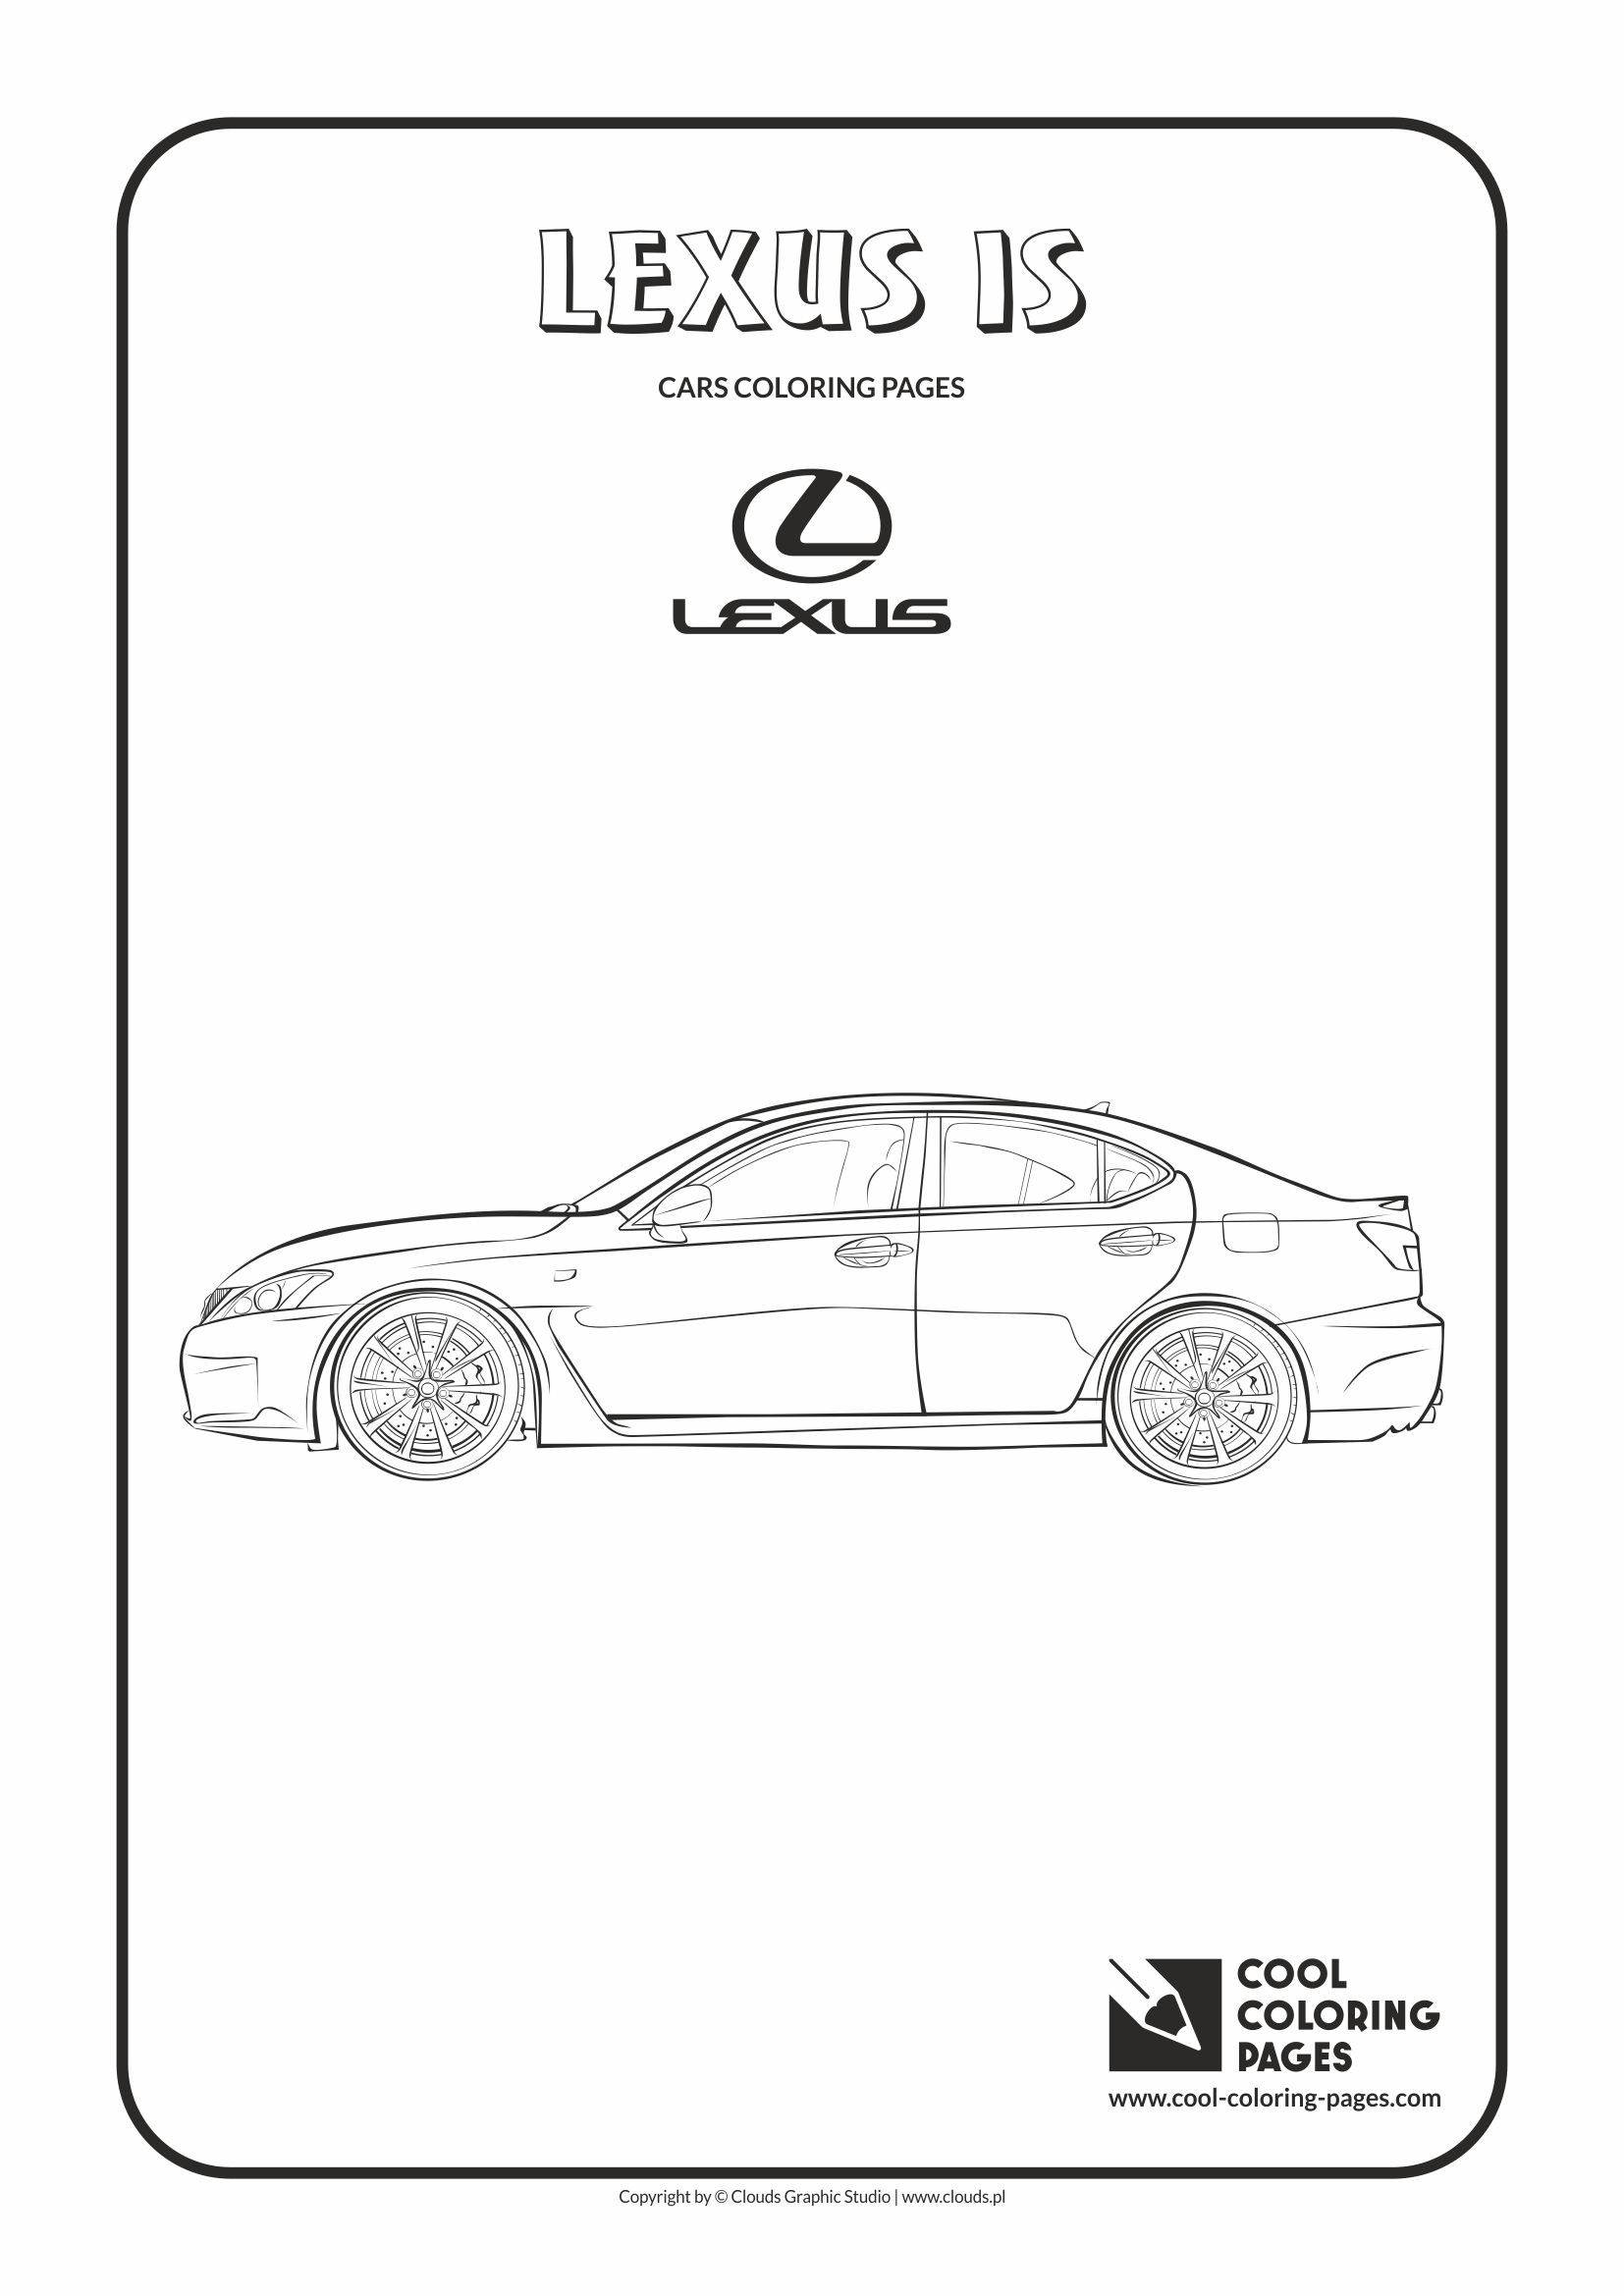 Cool Coloring Pages - Vehicles / Lexus IS / Coloring page with Lexus IS